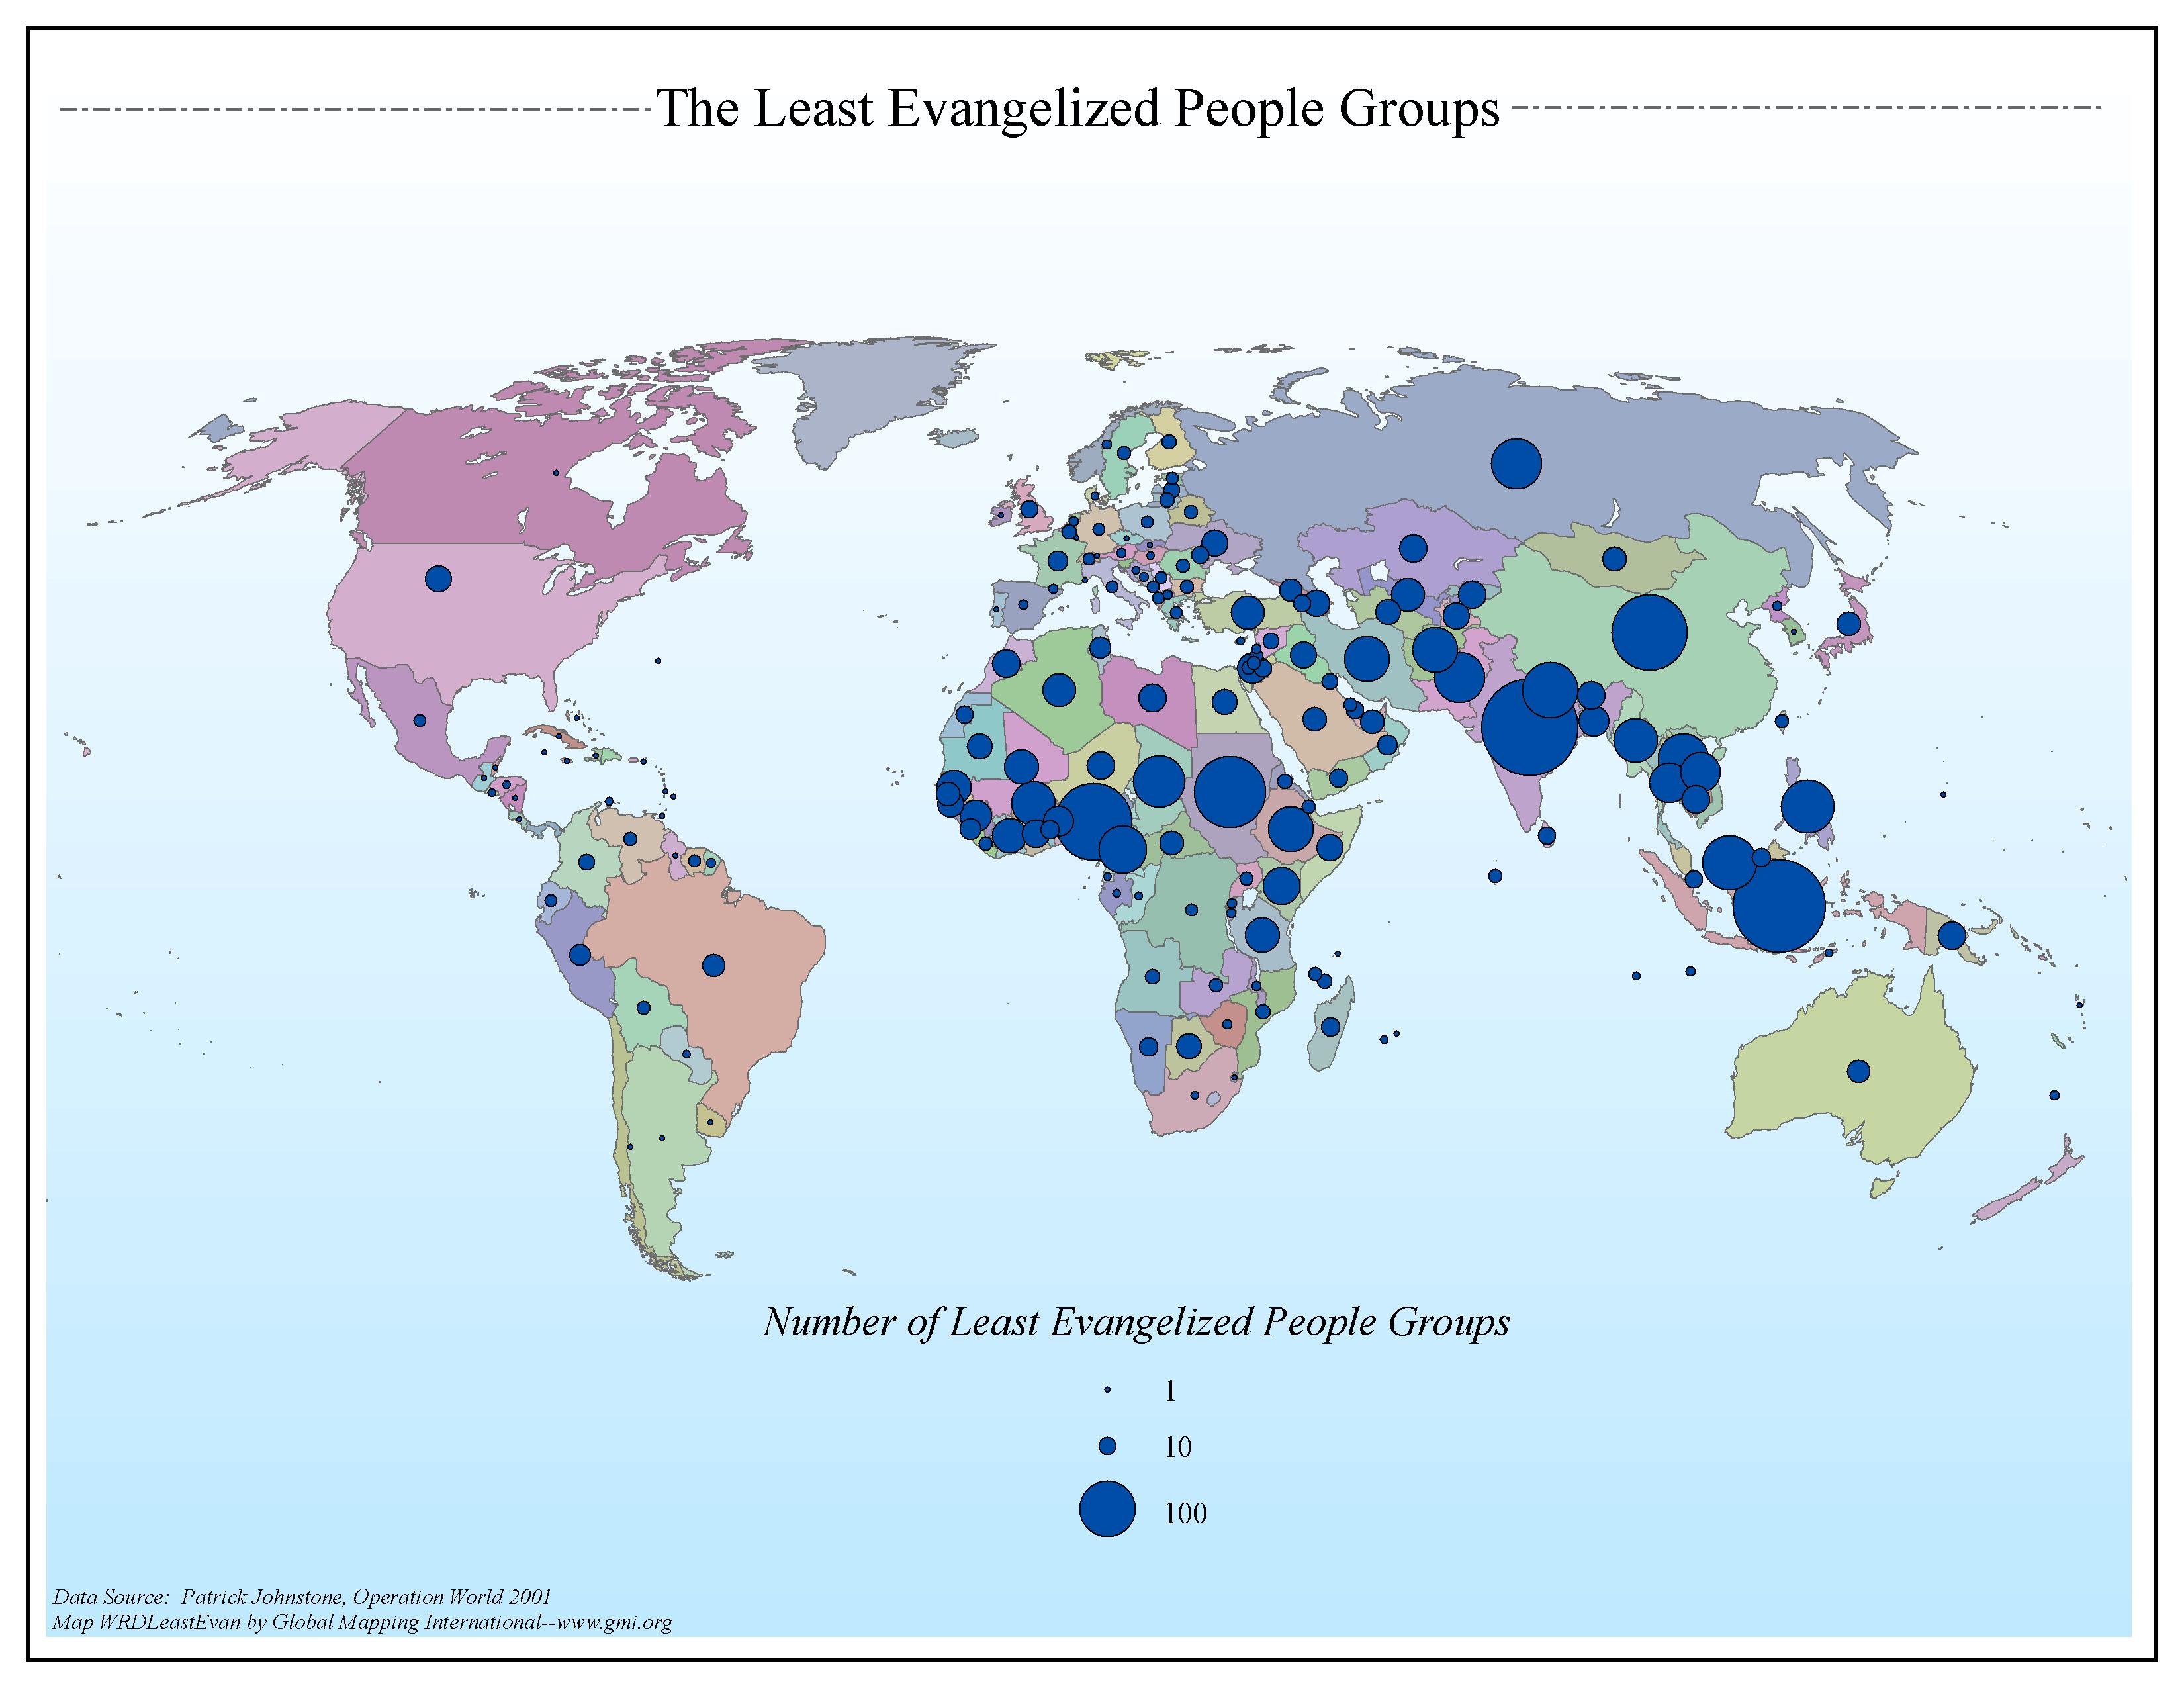 The Least Evangelized People Groups